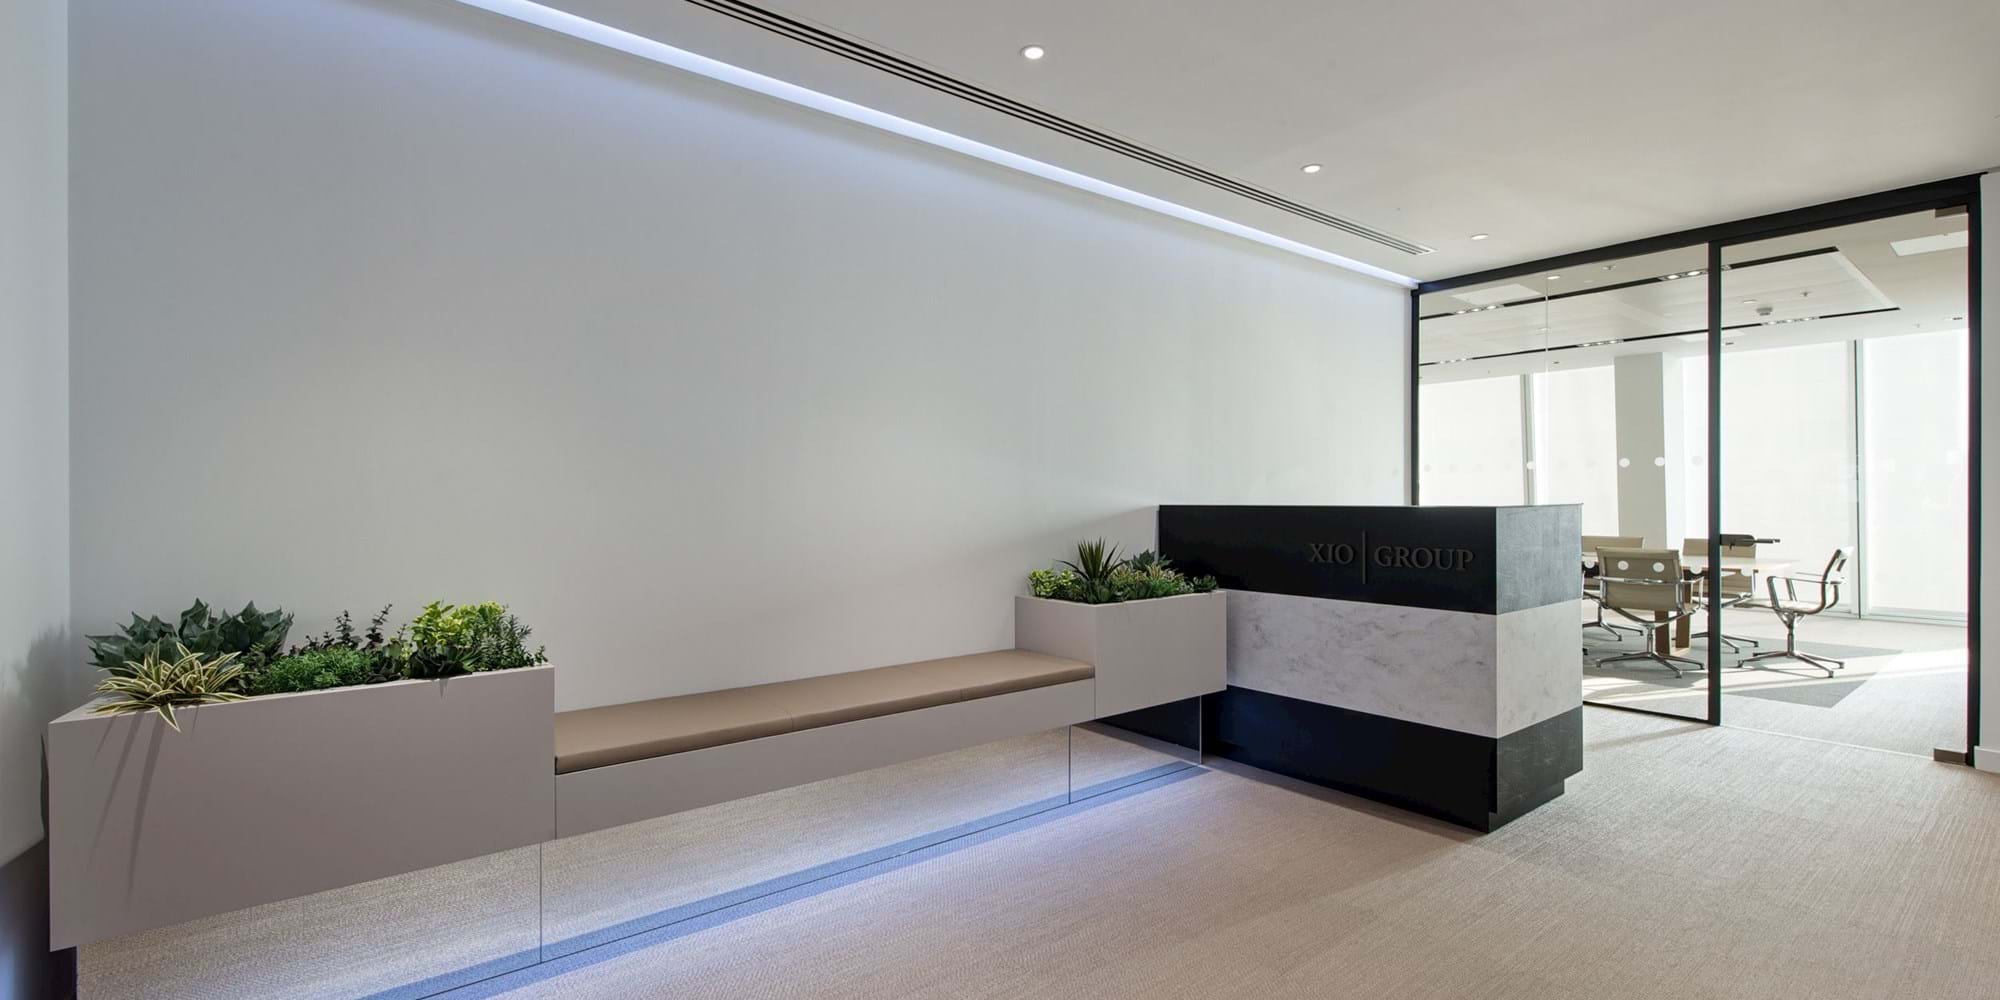 Modus Workspace office design, fit out and refurbishment - XIO - XIO 01 highres sRGB.jpg